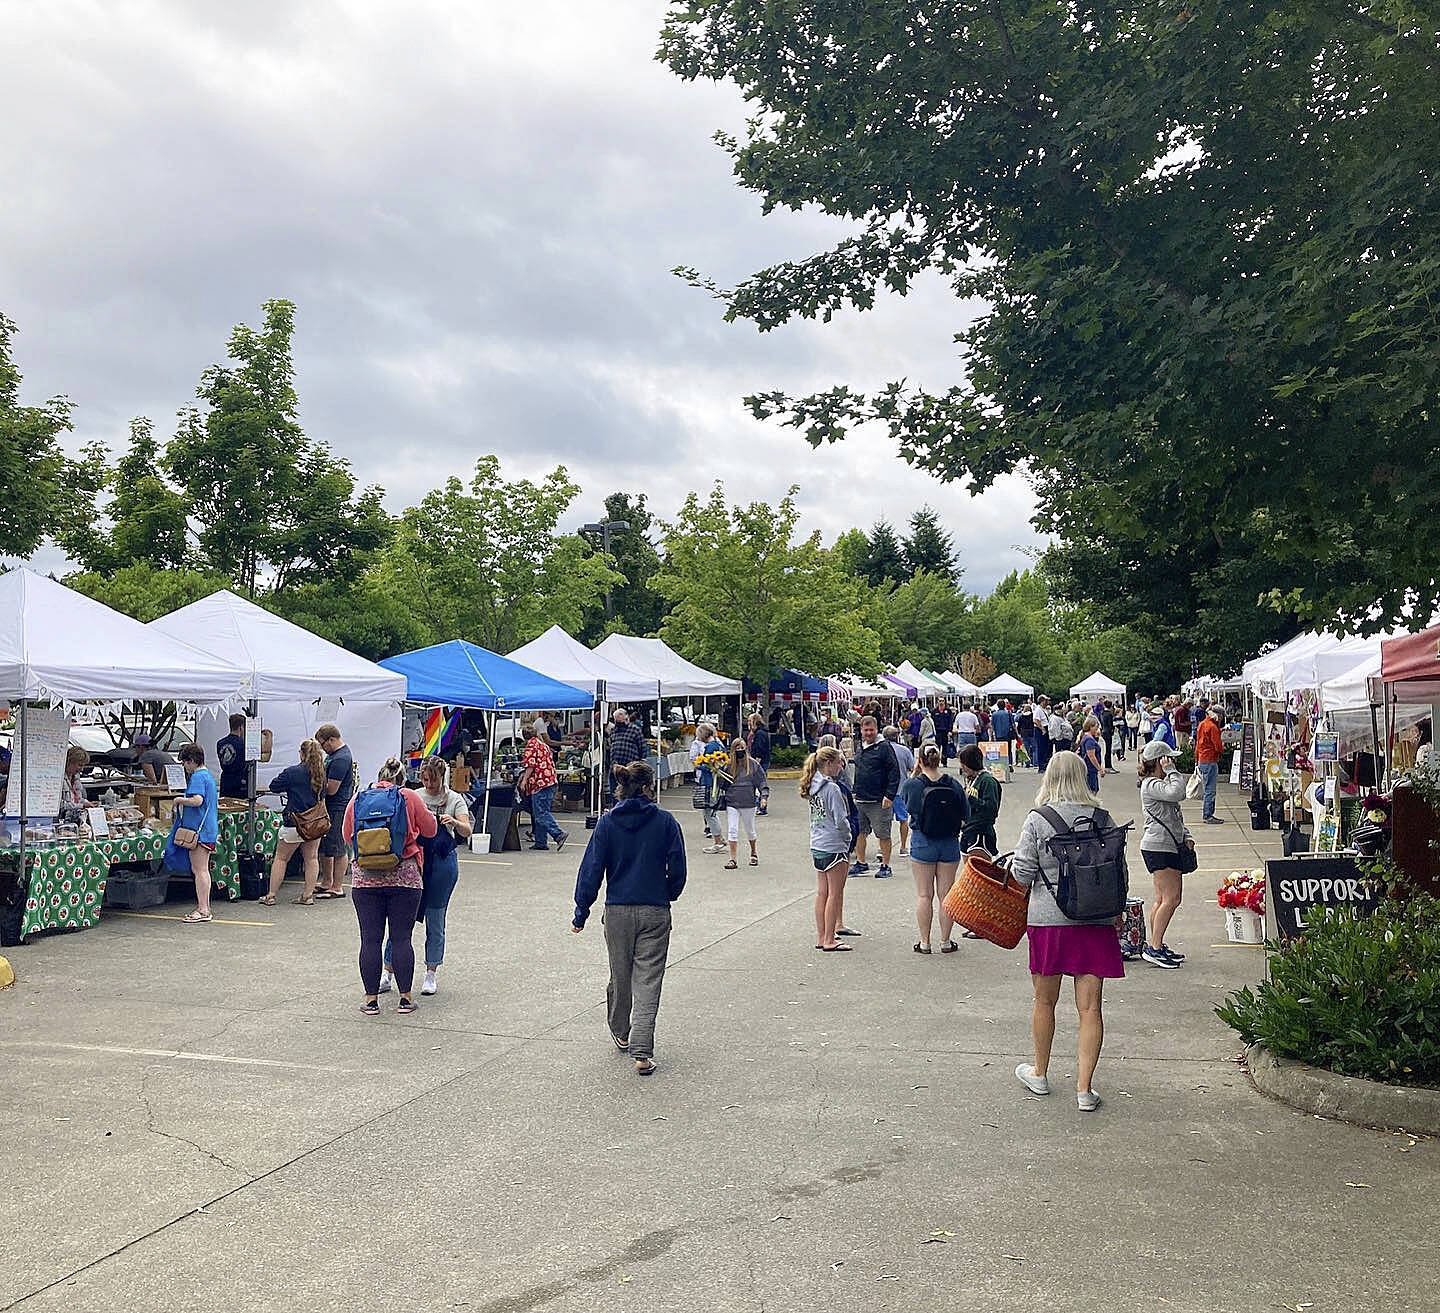 Courtesy Photos
The Poulsbo Farmers Market will be staying at Gateway Fellowship church this year as the search continues for a permanent location.